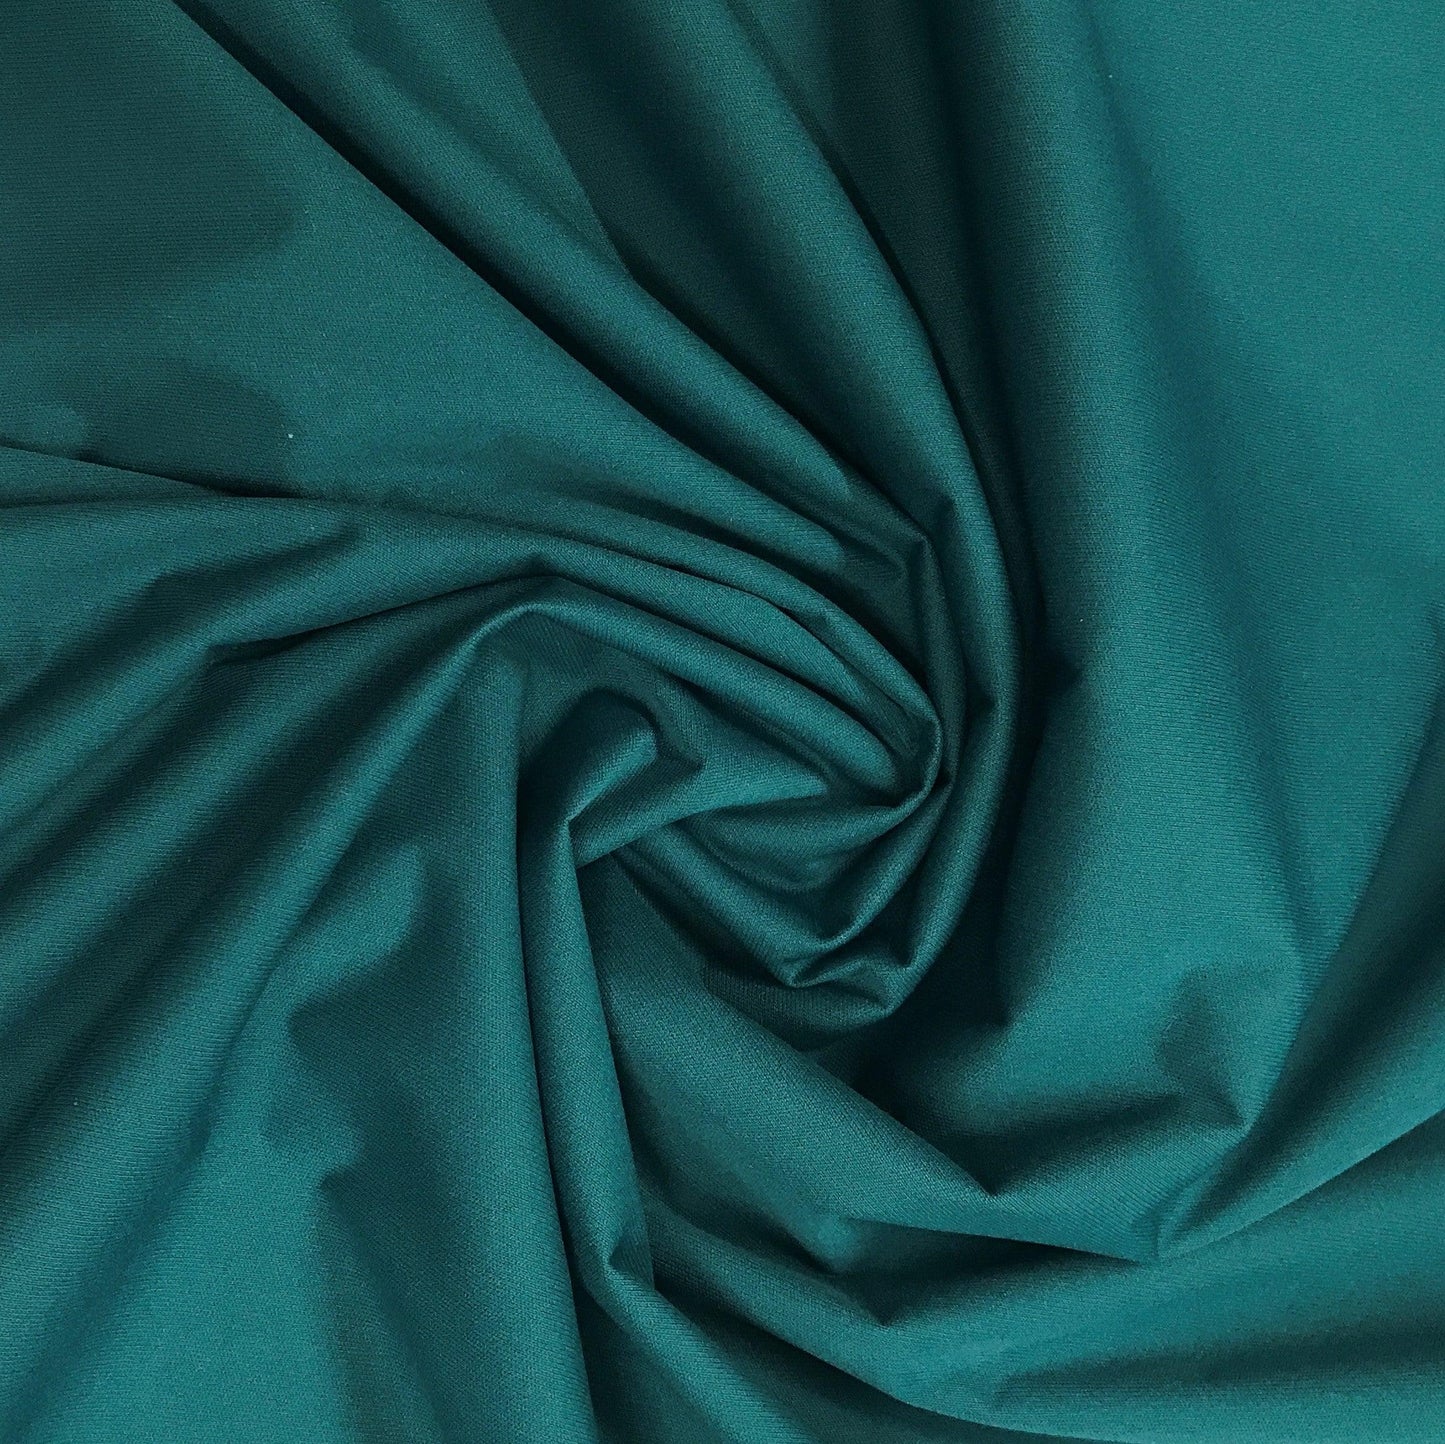 Teal 1 mil PUL Fabric- Made in the USA - Nature's Fabrics